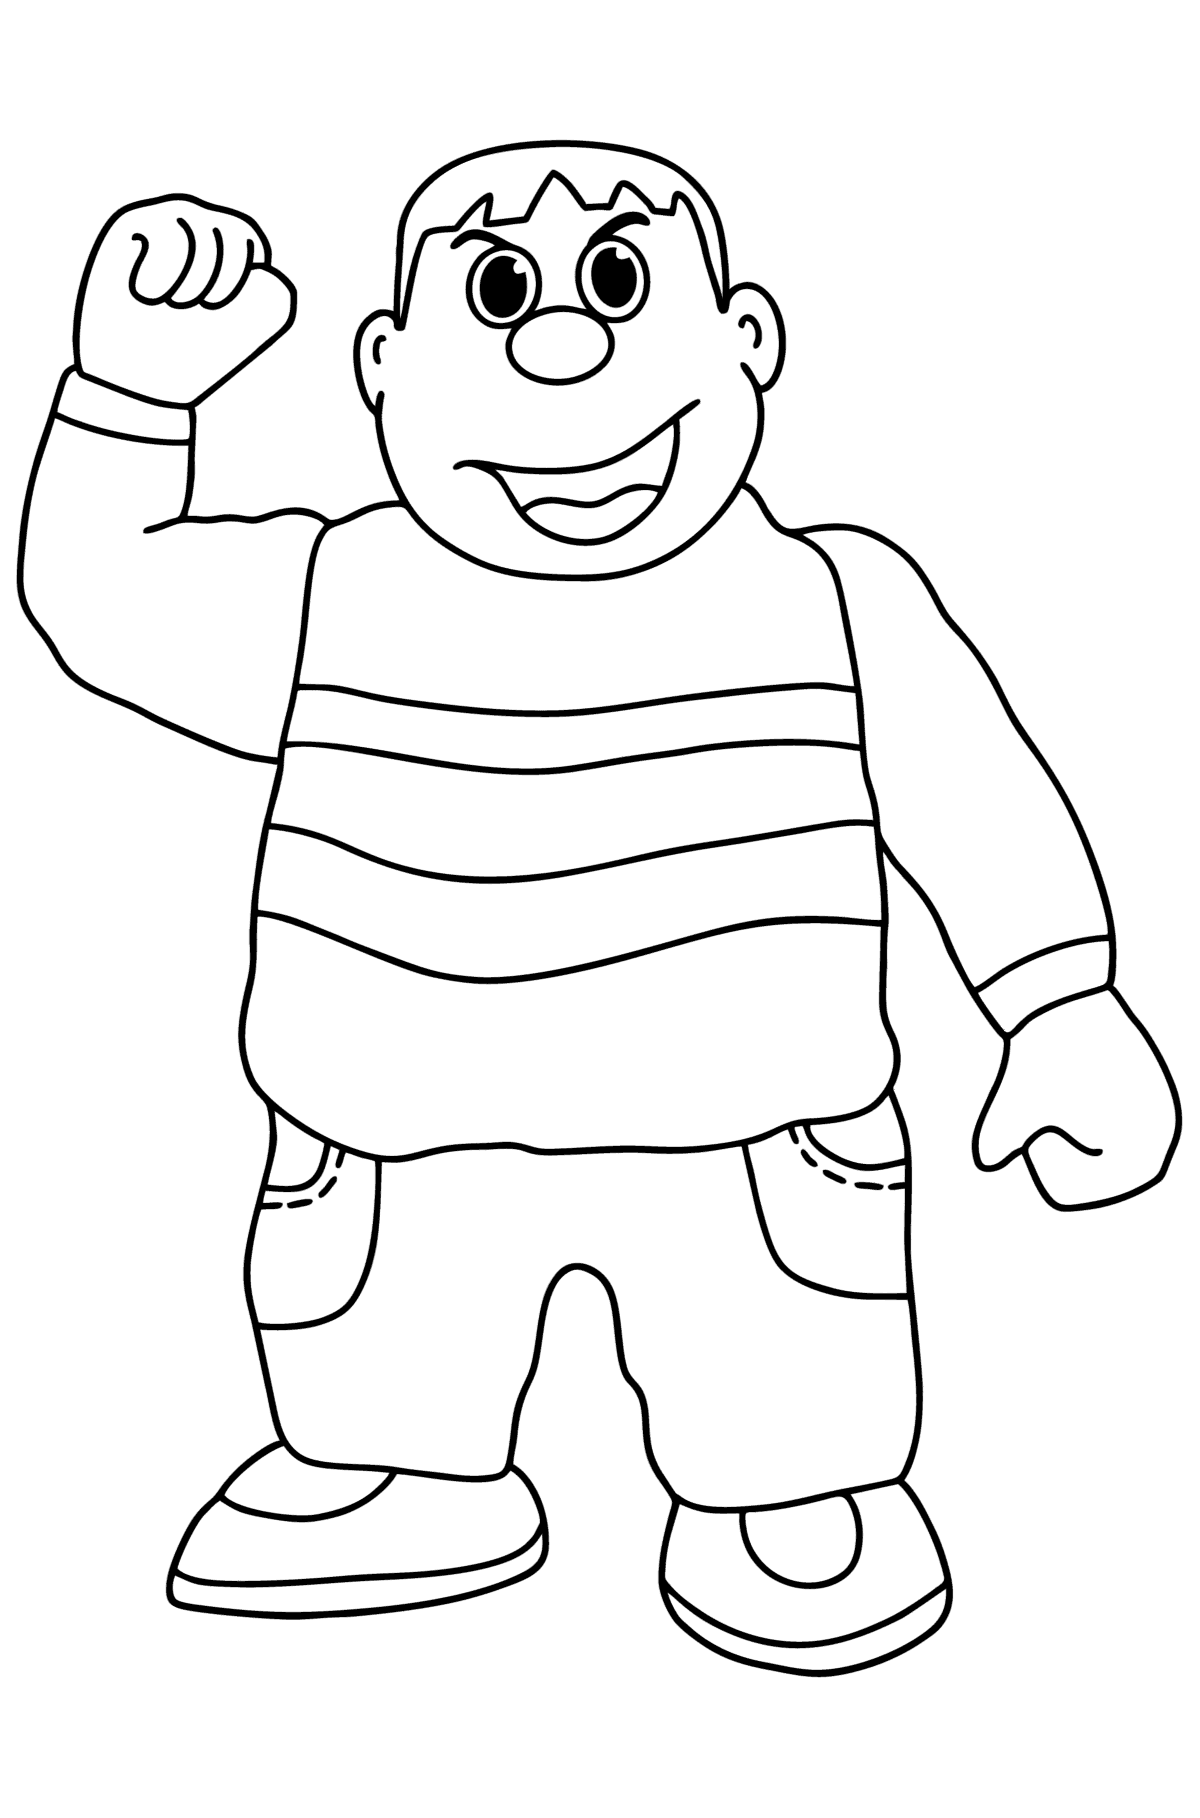 Doraemon Gian Big G сoloring page - Coloring Pages for Kids